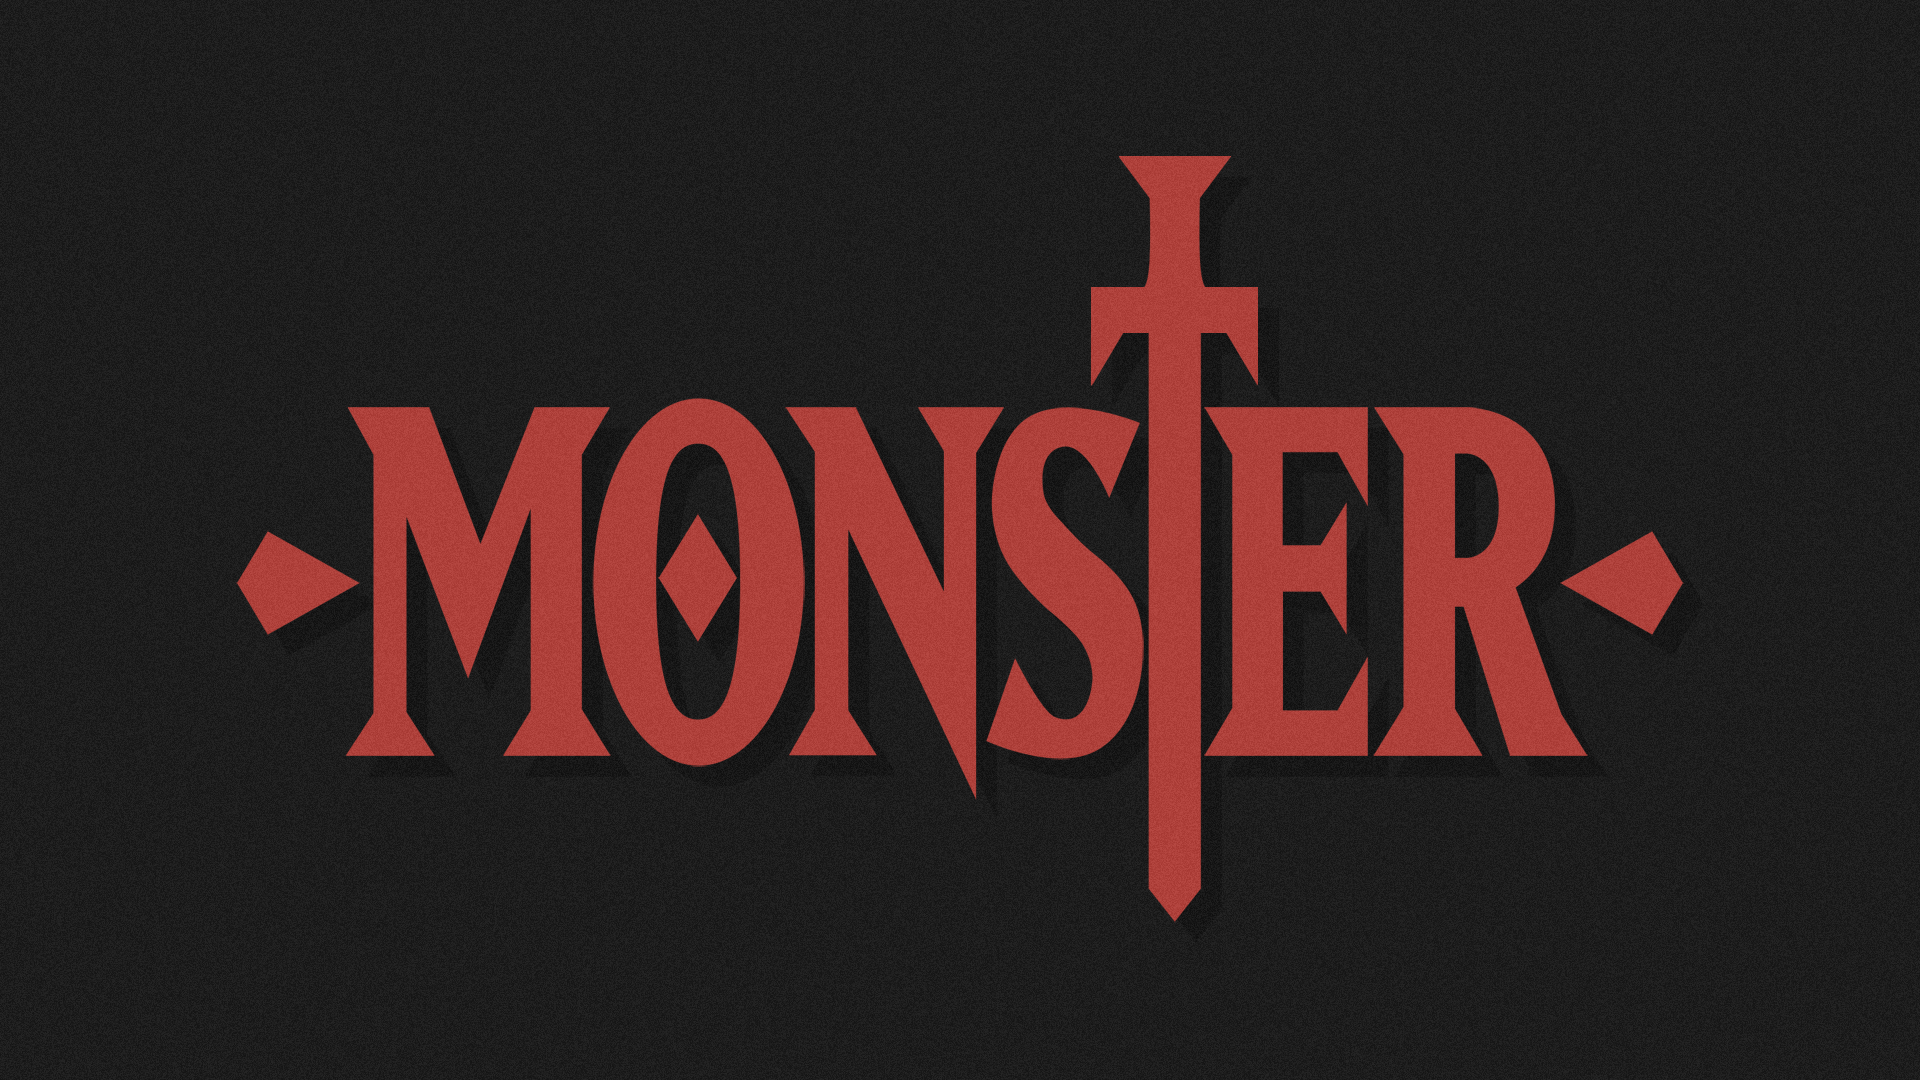 I've been watching the Monster anime, so I made some